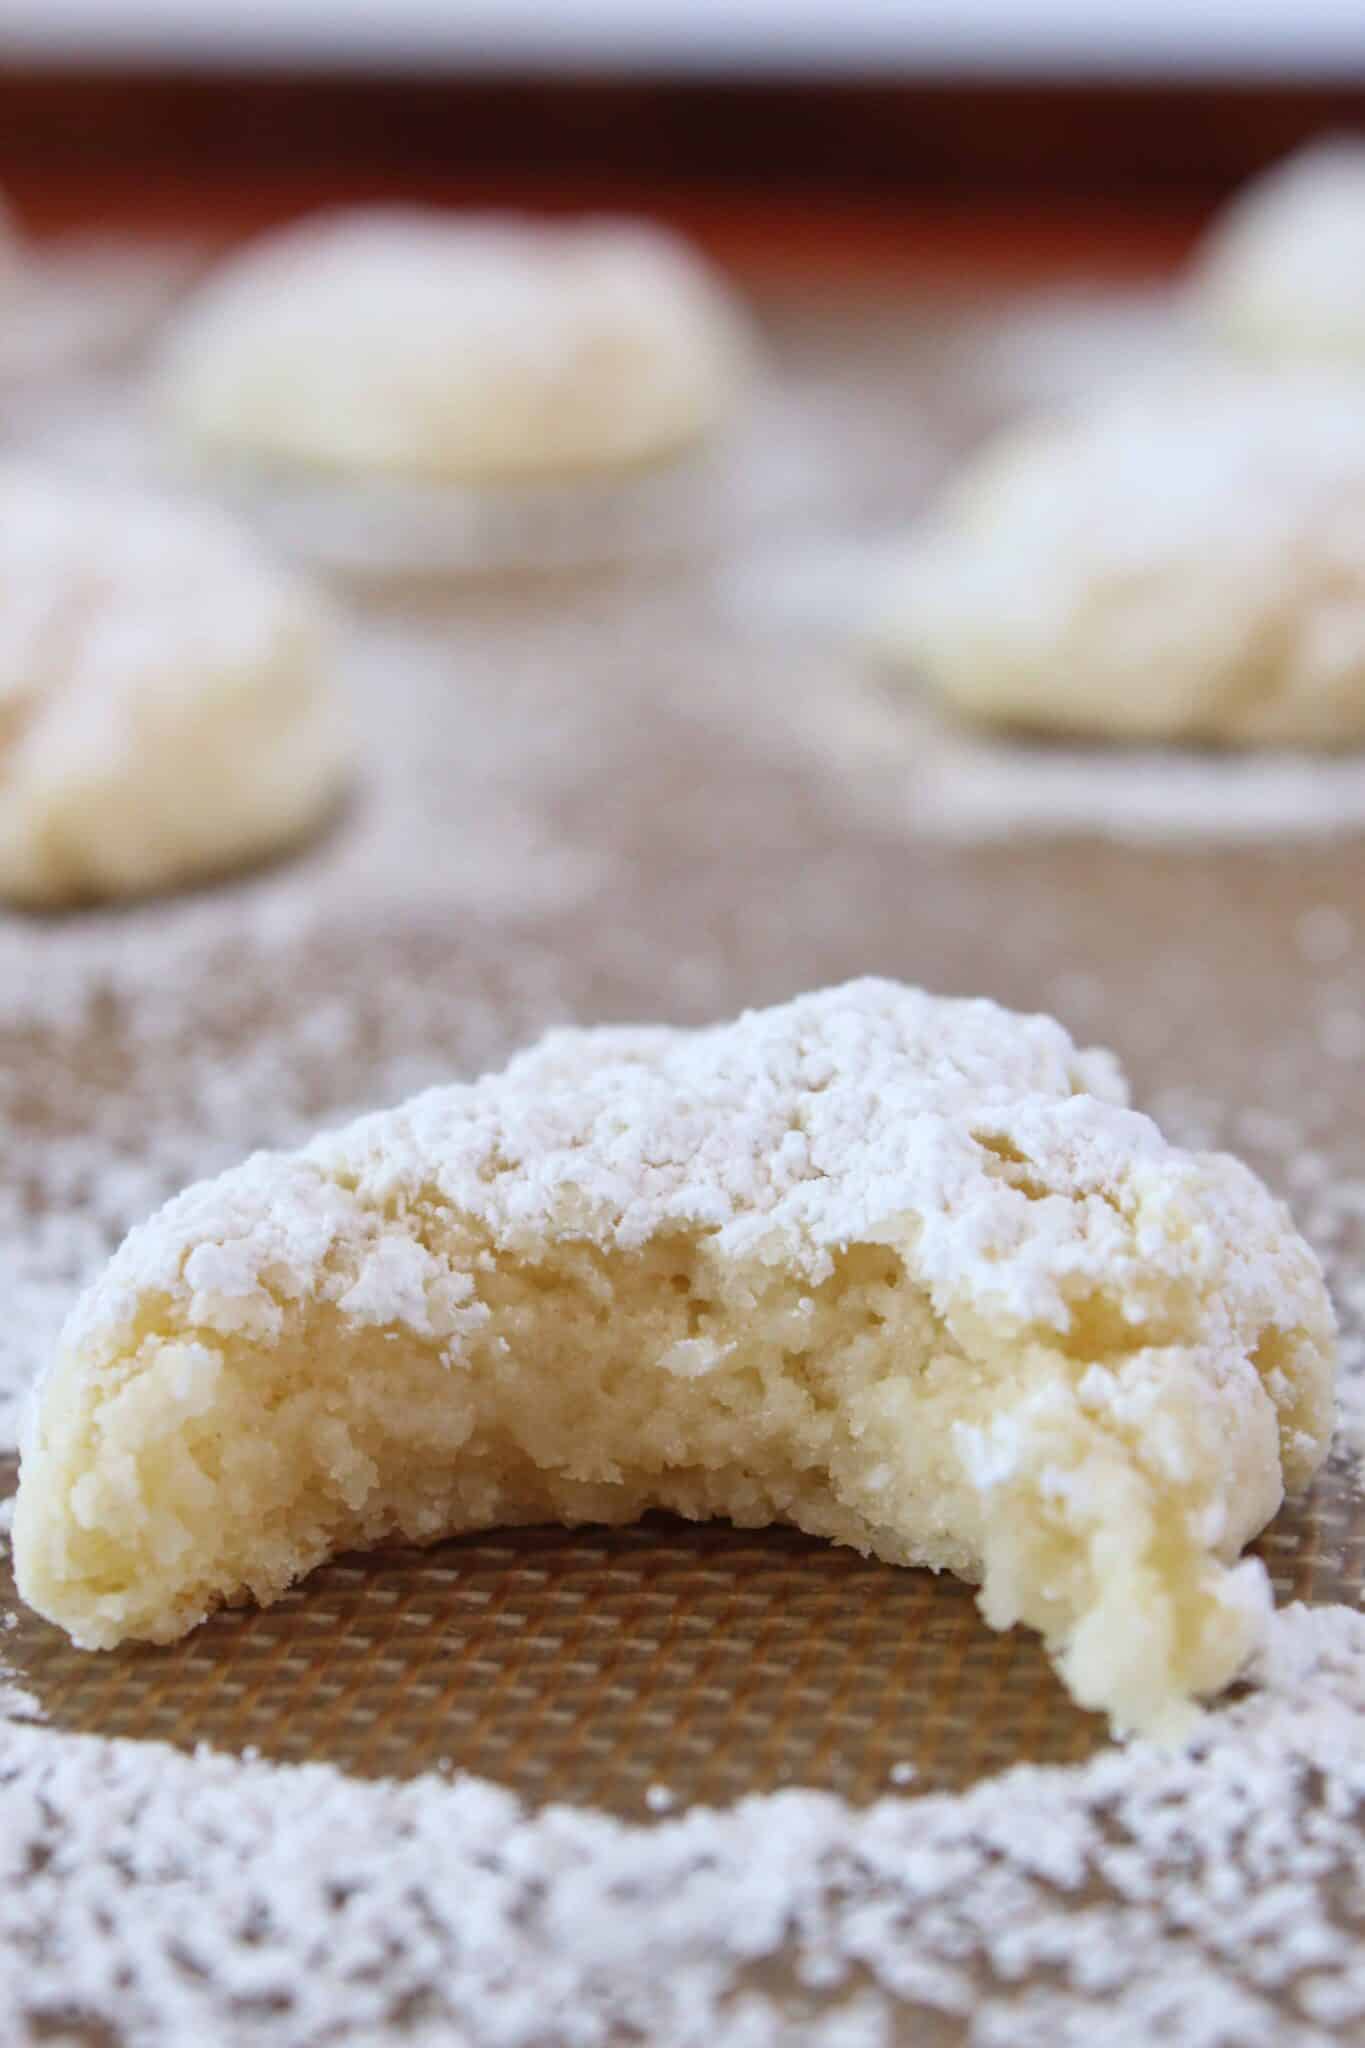 Cream Cheese Cake Mix Cookies Recipe featured by top US cookies blog, Practically Homemade